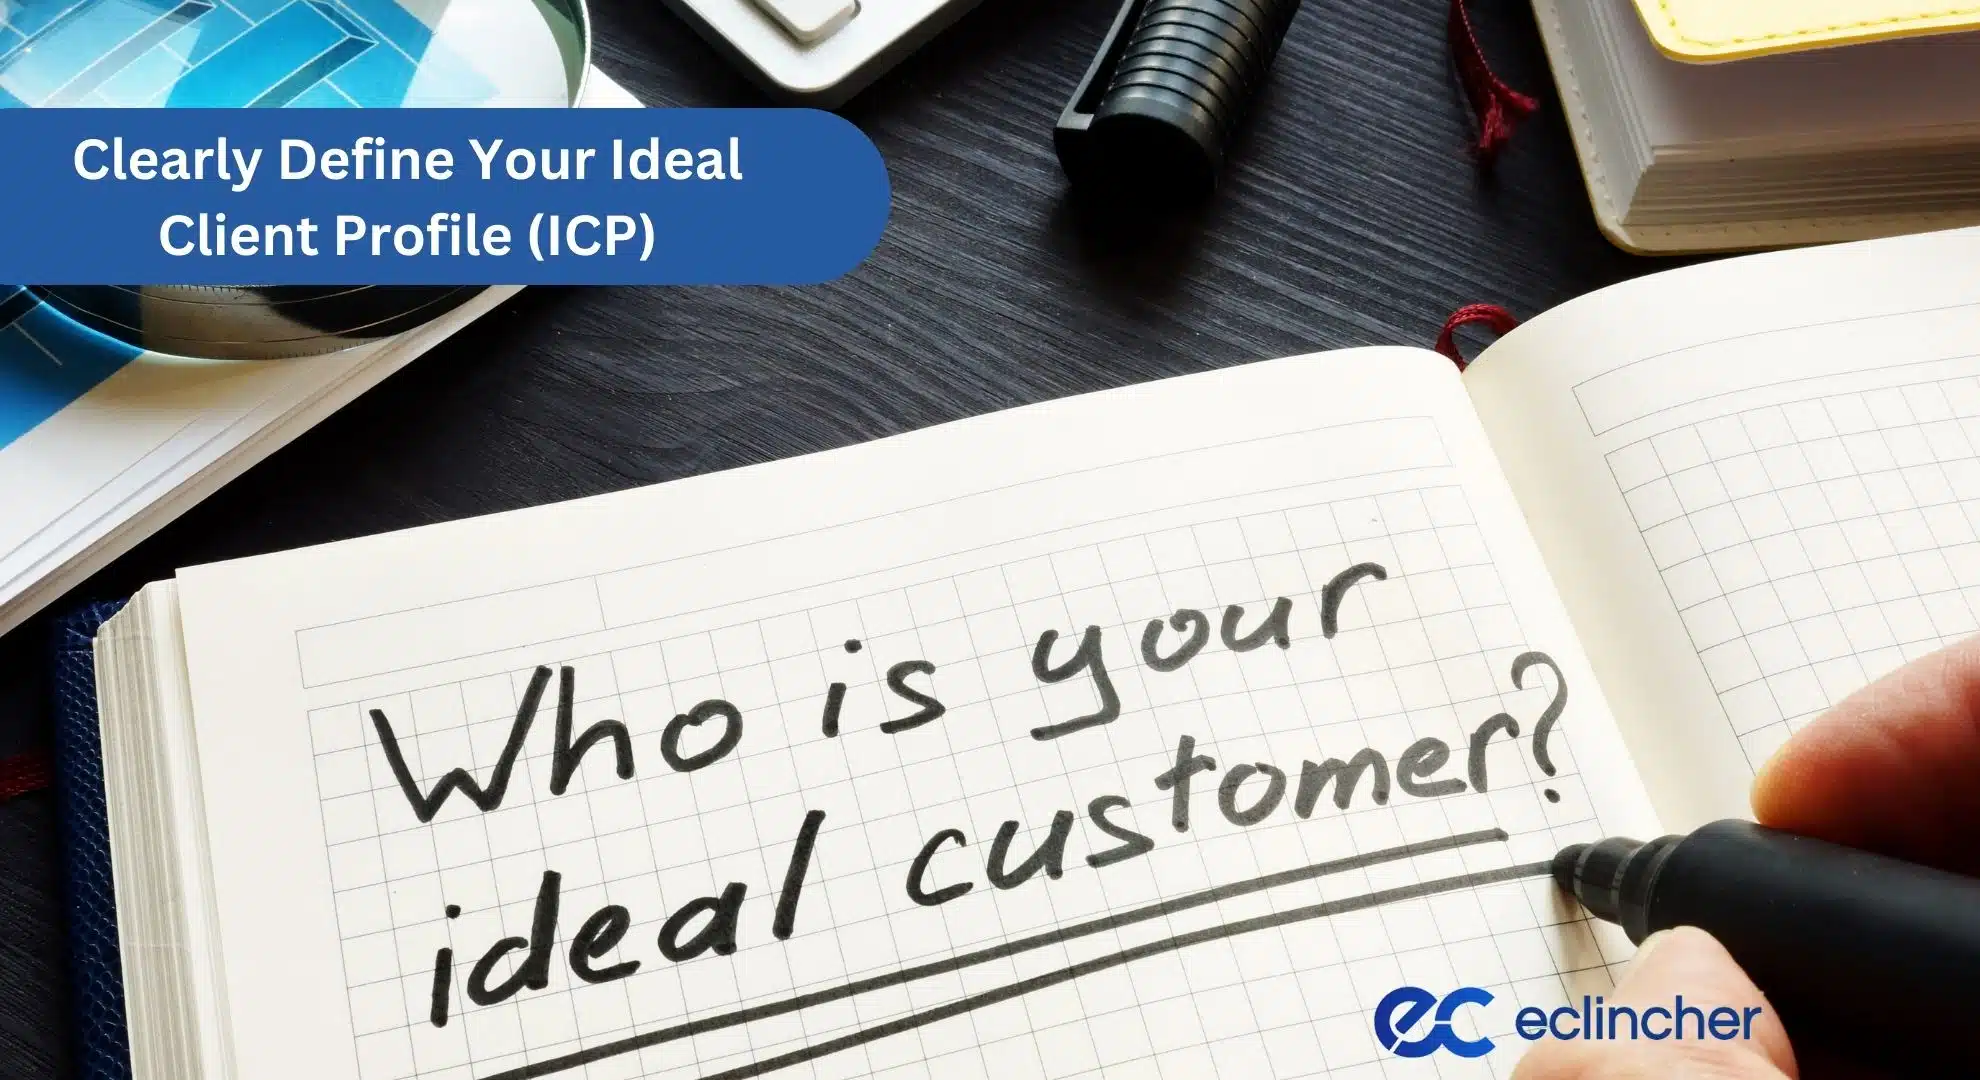 Clearly Define Your Ideal Client Profile (ICP)